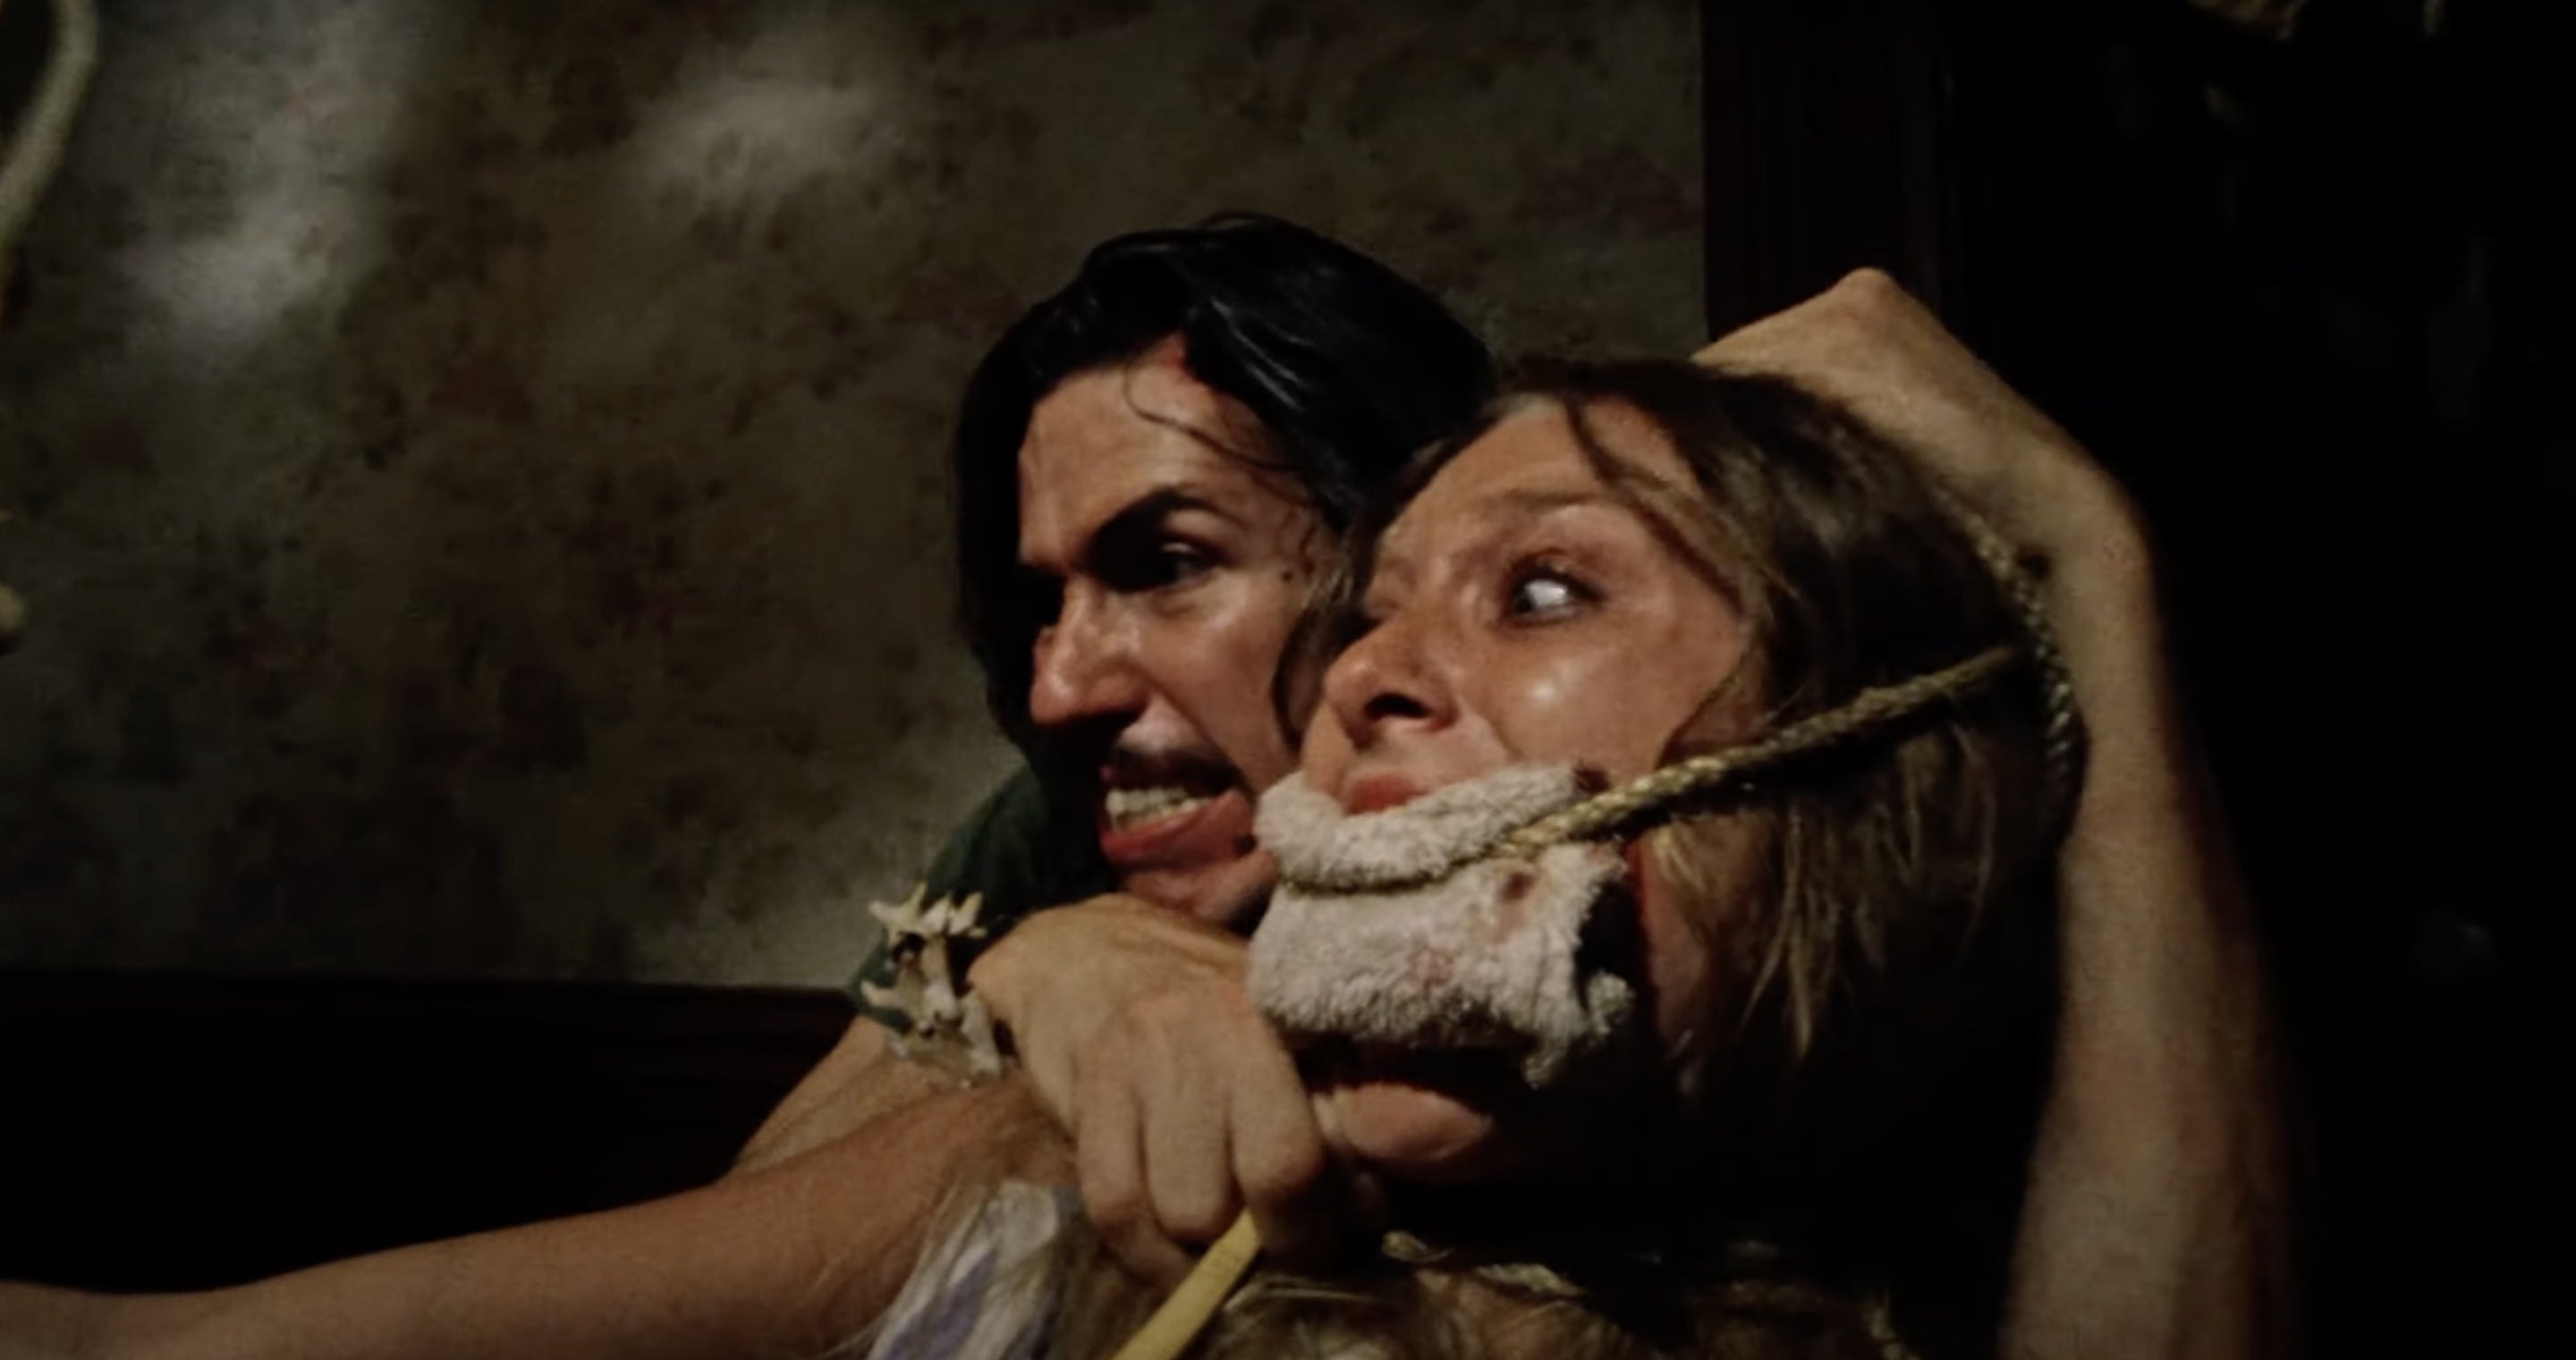 Man holding the head of a woman with a gag in her mouth